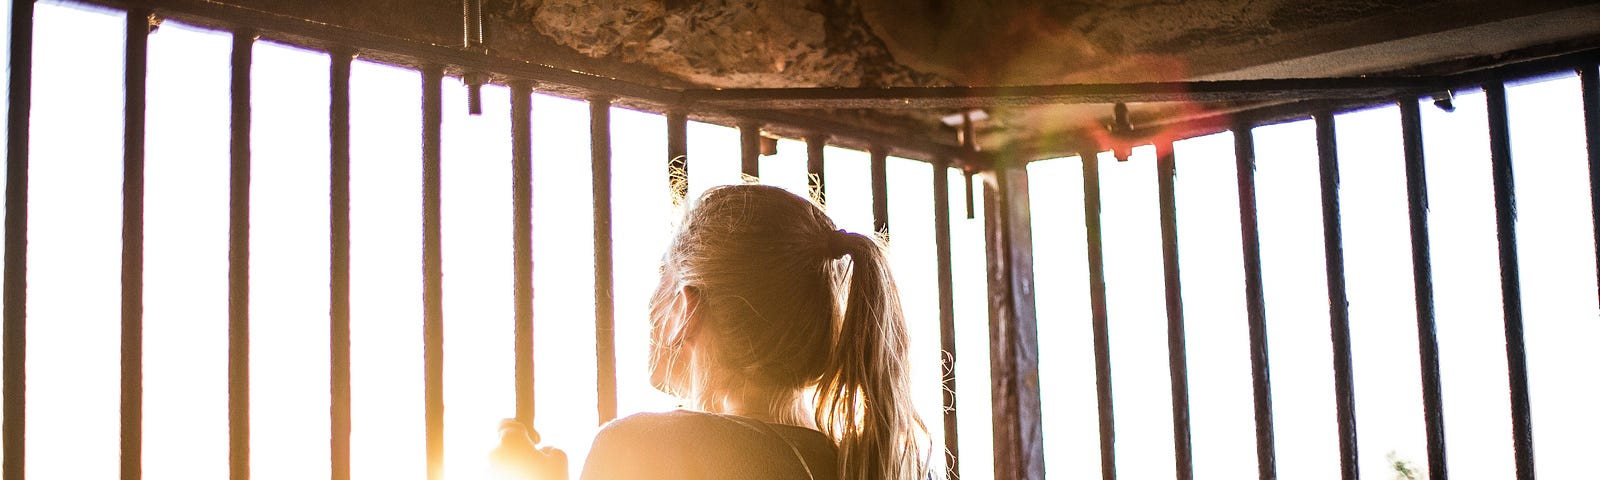 A woman stands behind bars looking out at the world. Self-imprisoned, she is insecure about life beyond the confines of walls. Light peers in through a grey sky warming her, making her think of all she is missing. She wear a dark sweatshirt and sports a long blonde pony tail.